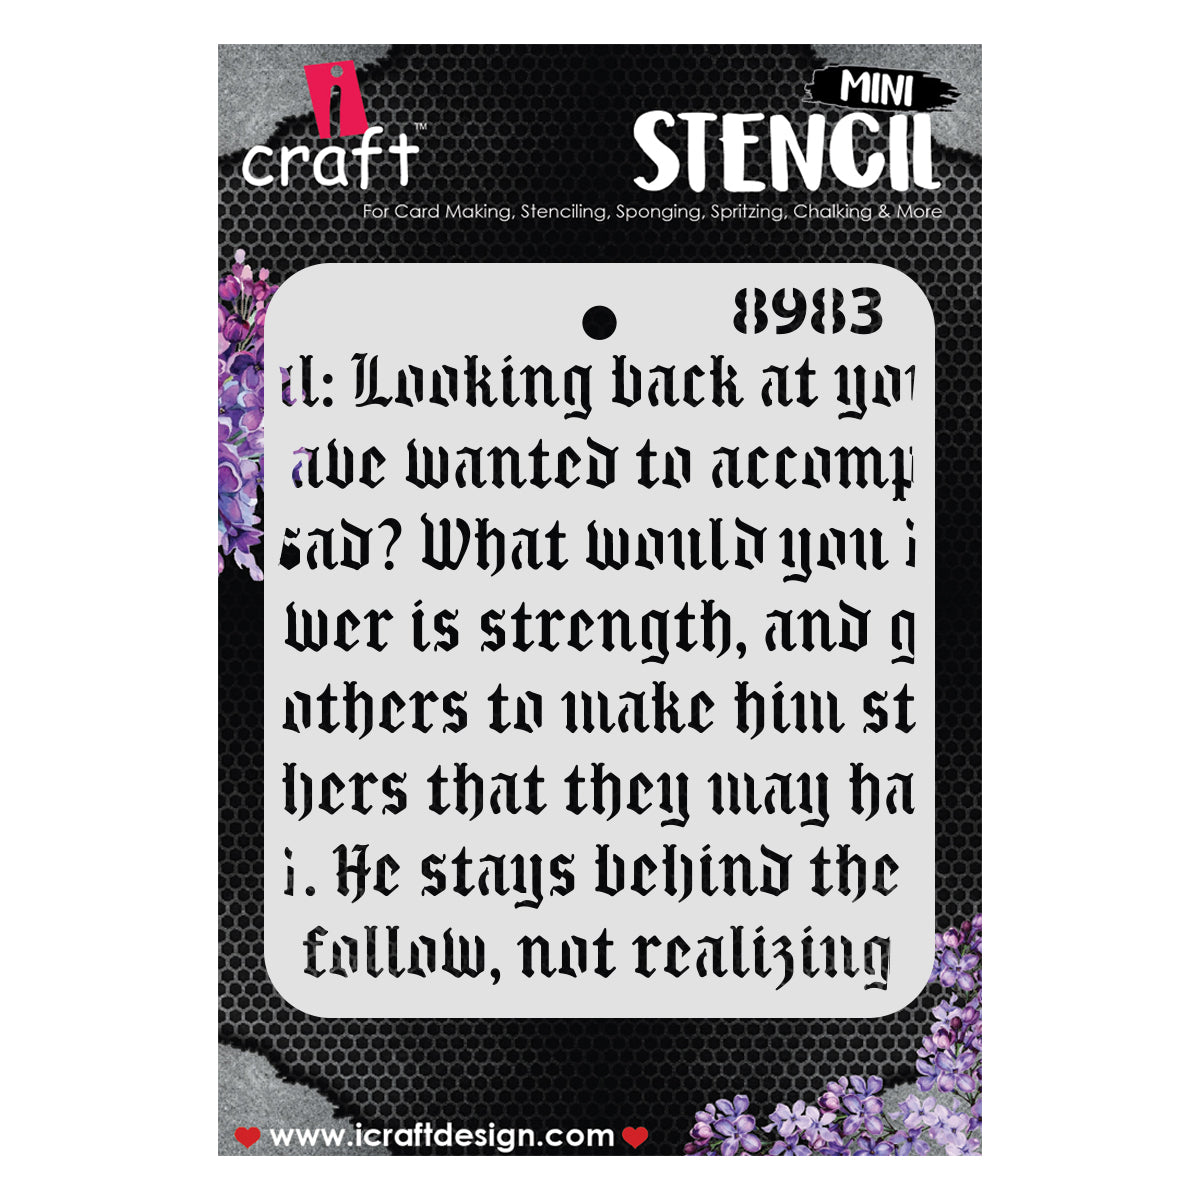 iCraft Multi-Surface Stencils - Perfect for Walls, DIY & Resin Art Projects | Reusable |Mini Stencil 4"x 4"-8983